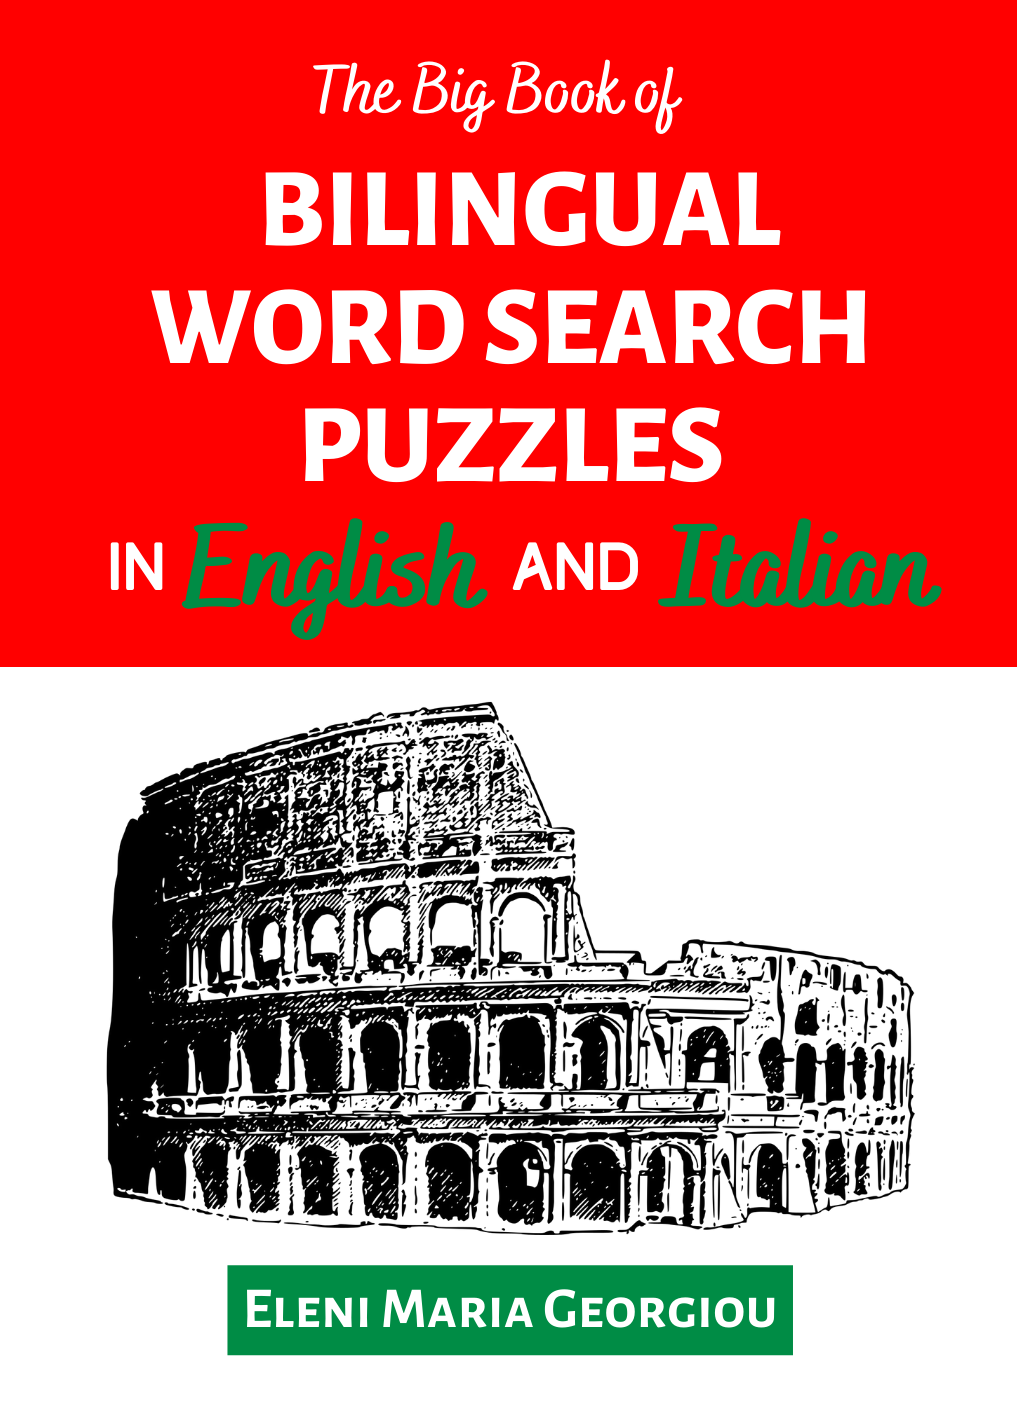 The Big Book of Bilingual Word Search Puzzles in English and Italian